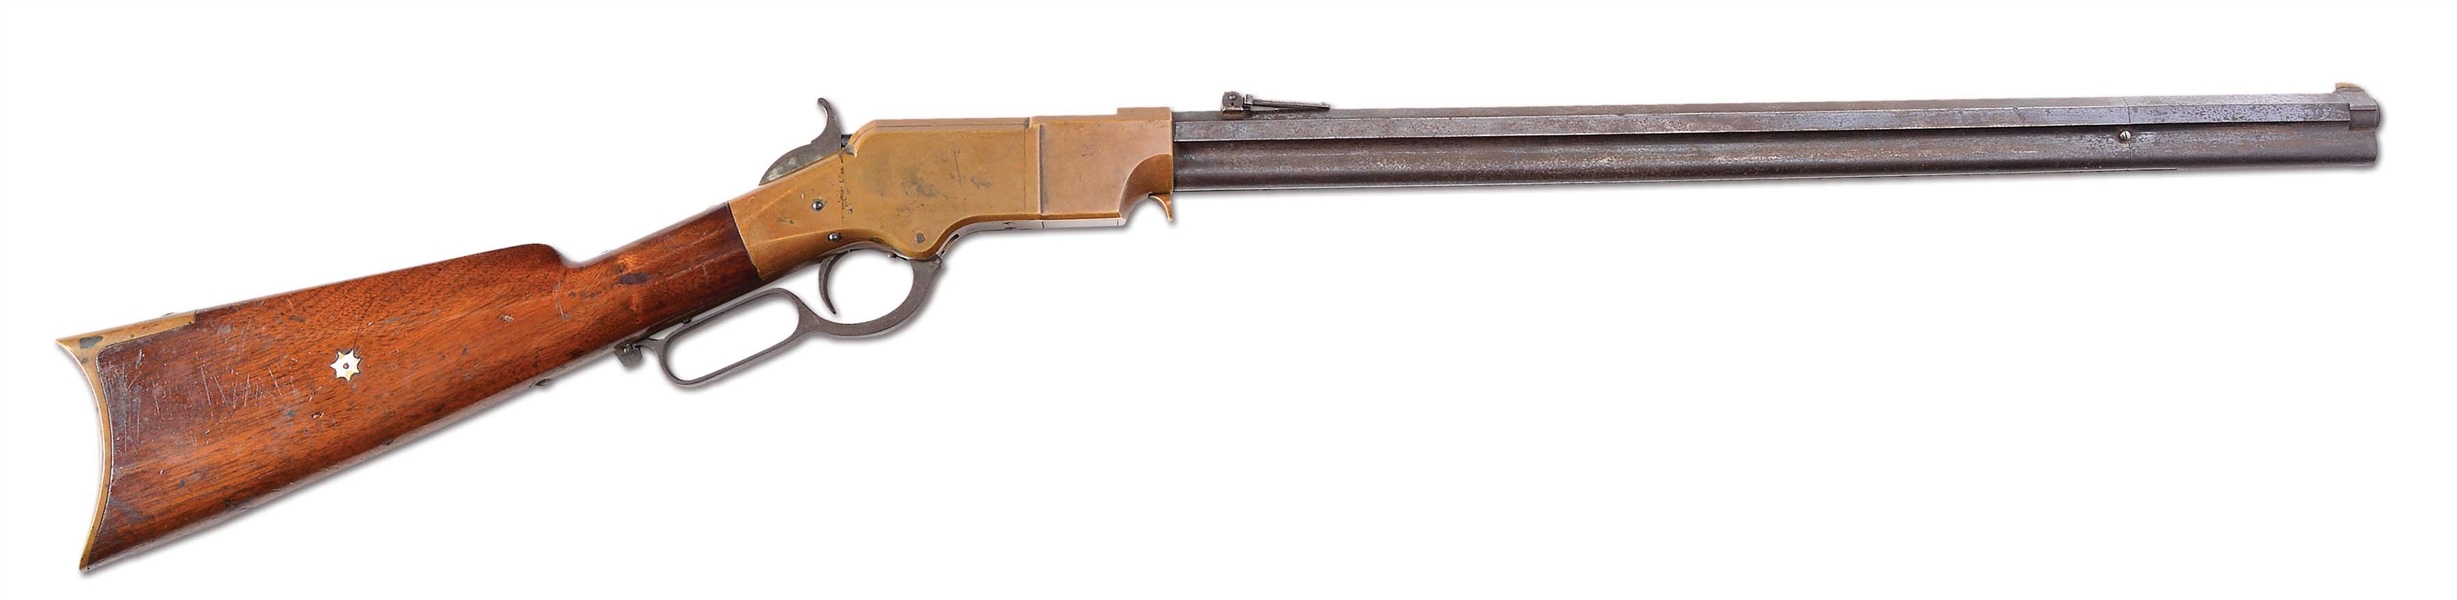 (A) NEW HAVEN ARMS HENRY LEVER ACTION RIFLE (1864).